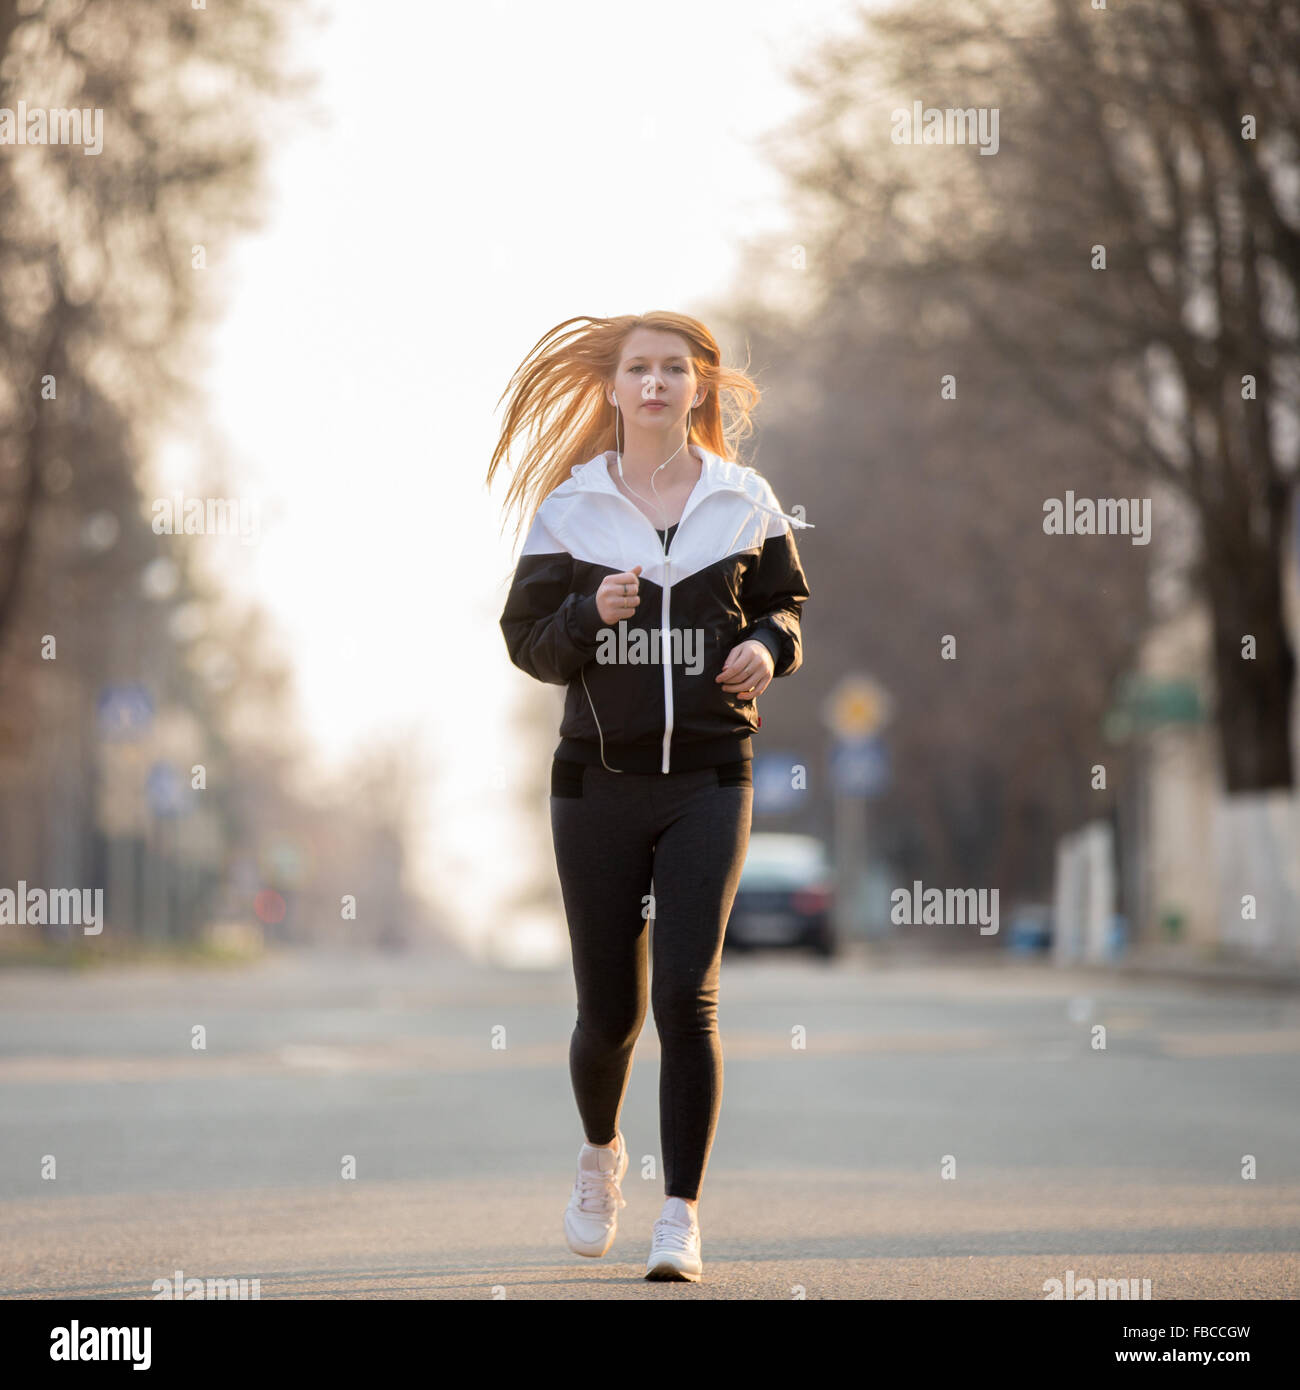 Athletic girl jogging with headphones in park Stock Photo by NomadSoul1